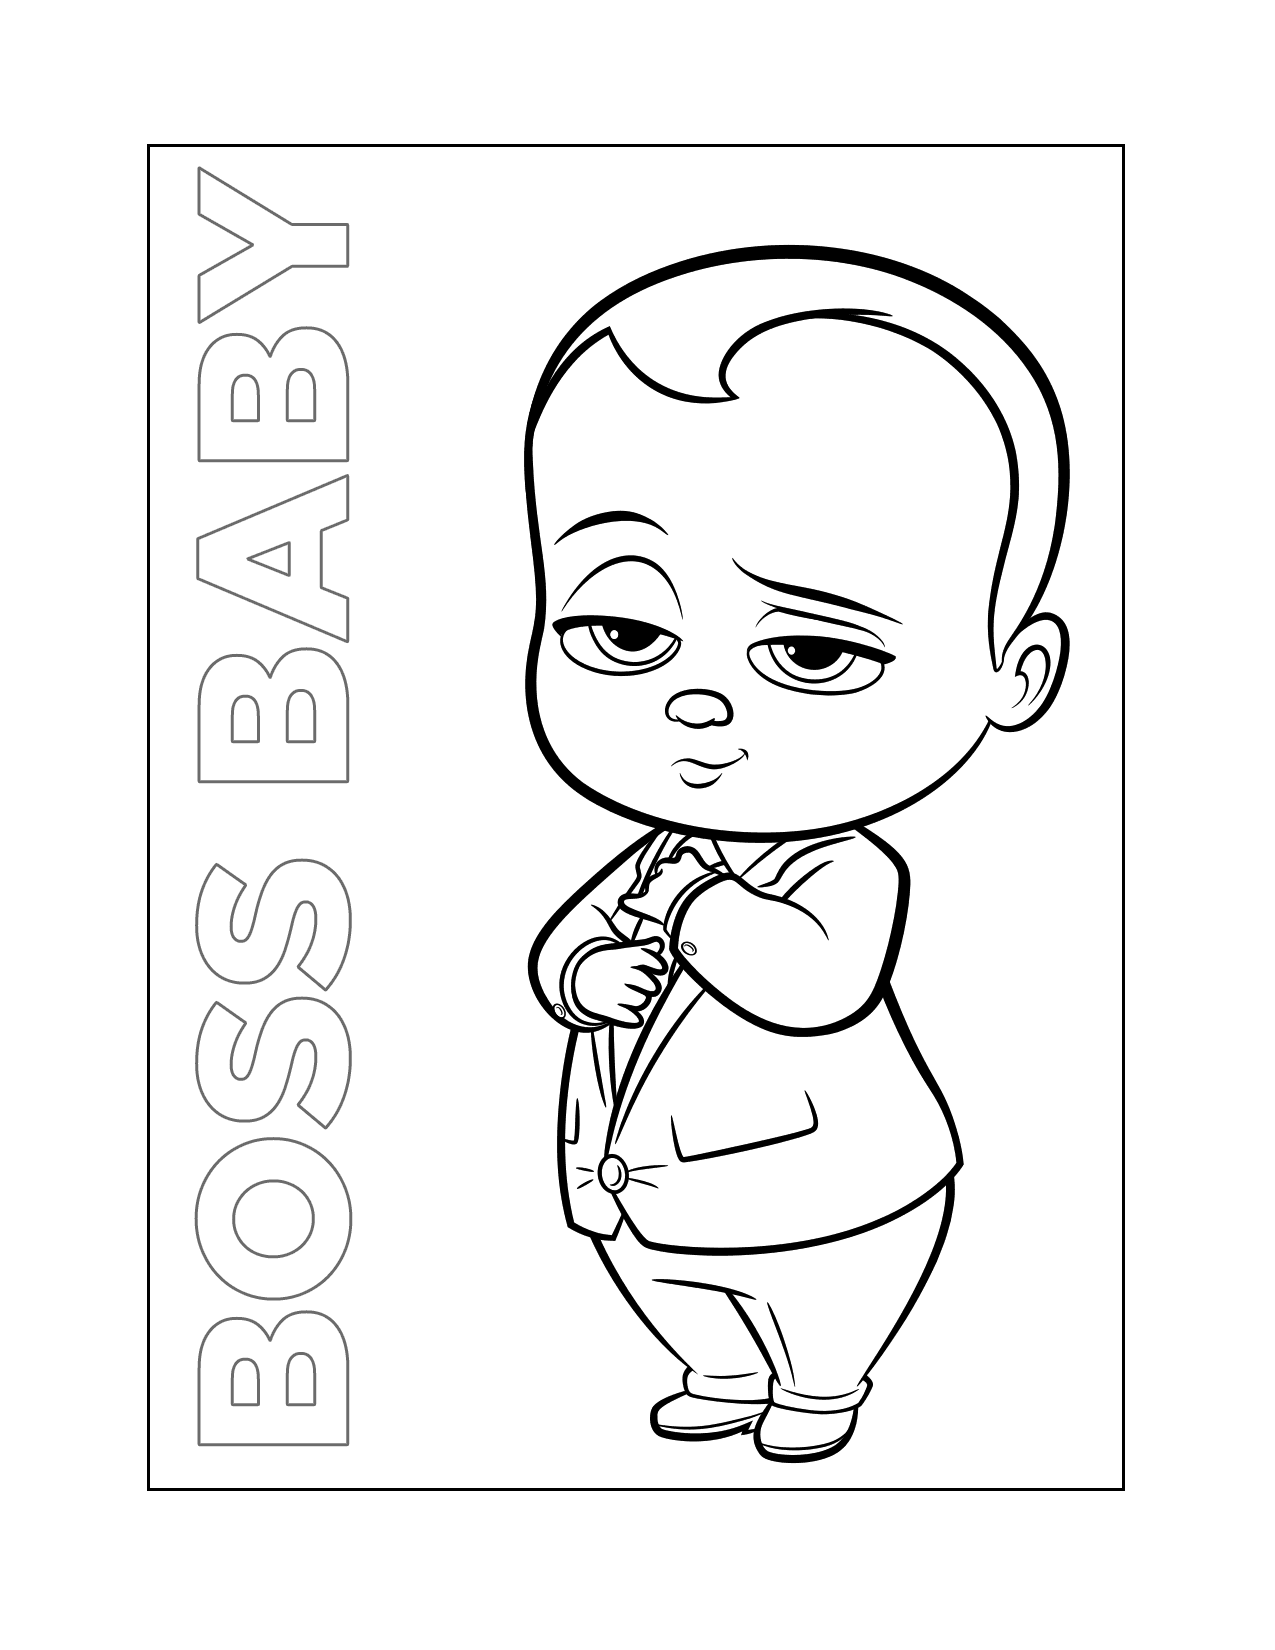 Boss Baby Coloring Pages